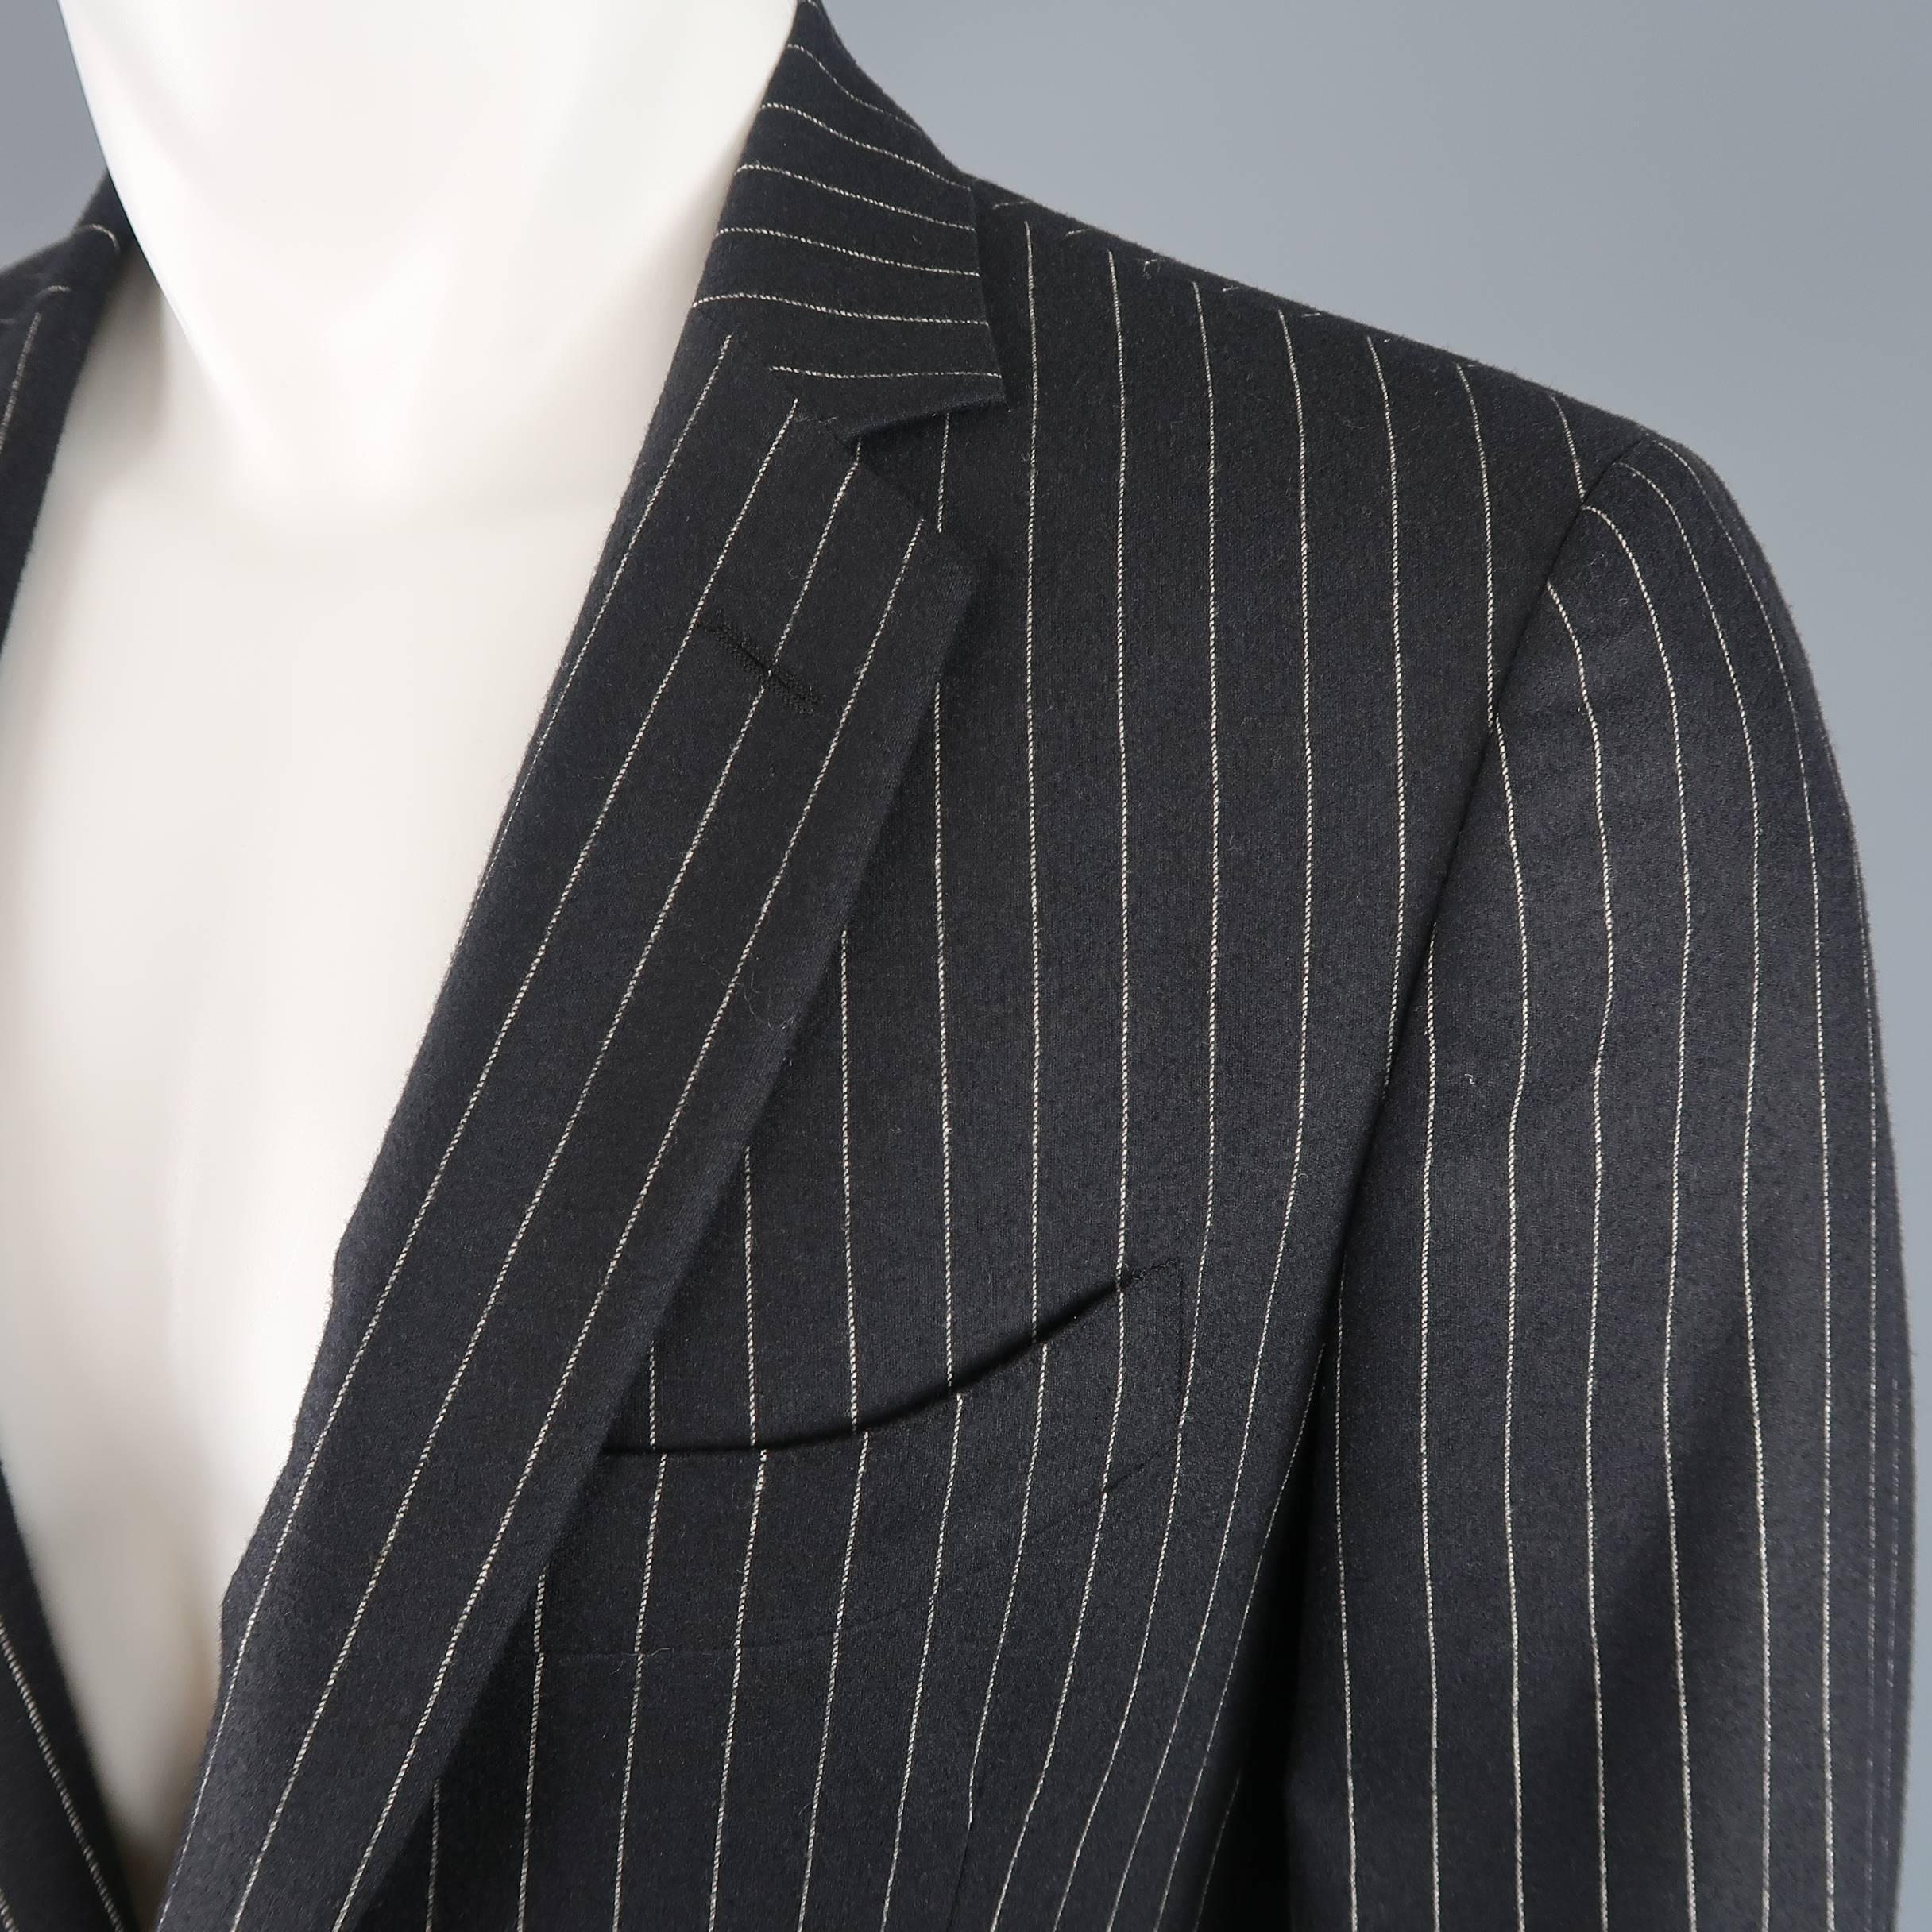 Single breasted John Varvatos sport coat comes in black wool cashmere with beige pinstripes, notch lapel, and two button front. Made in Italy.
 
Good Pre-Owned Condition.
Marked: IT 48 short
 
Measurements:
 
Shoulder: 17 in.
Chest: 40 in.
Sleeve: